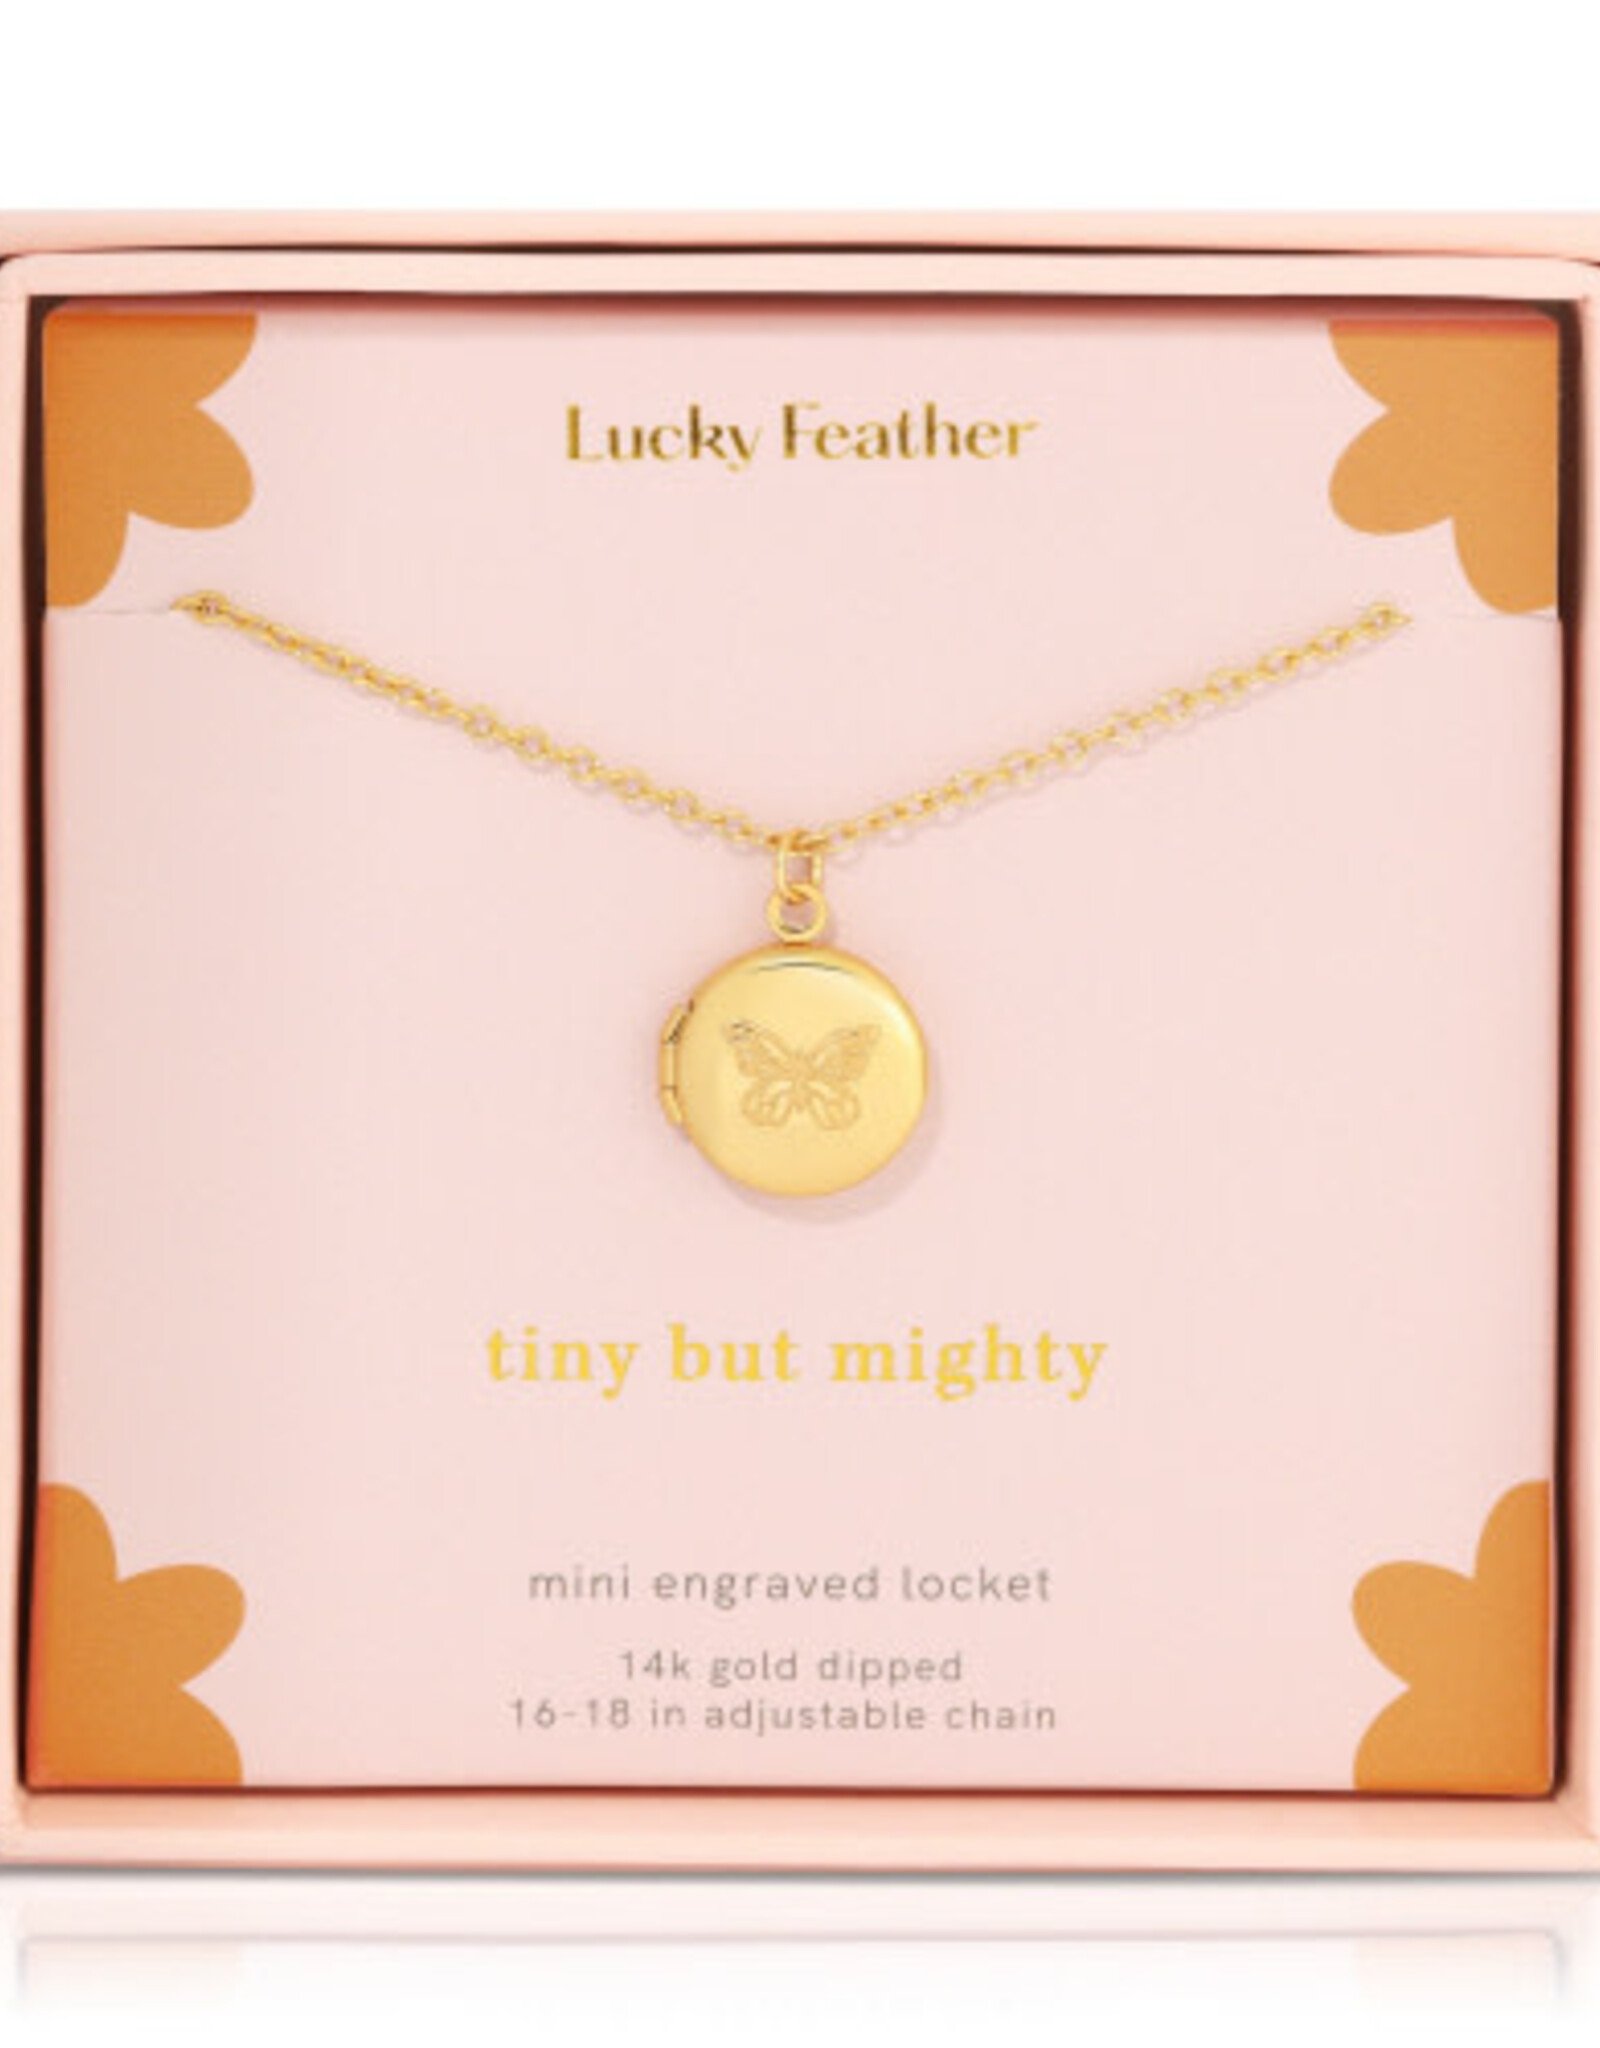 Lucky Feather Mini Engraved Lockets